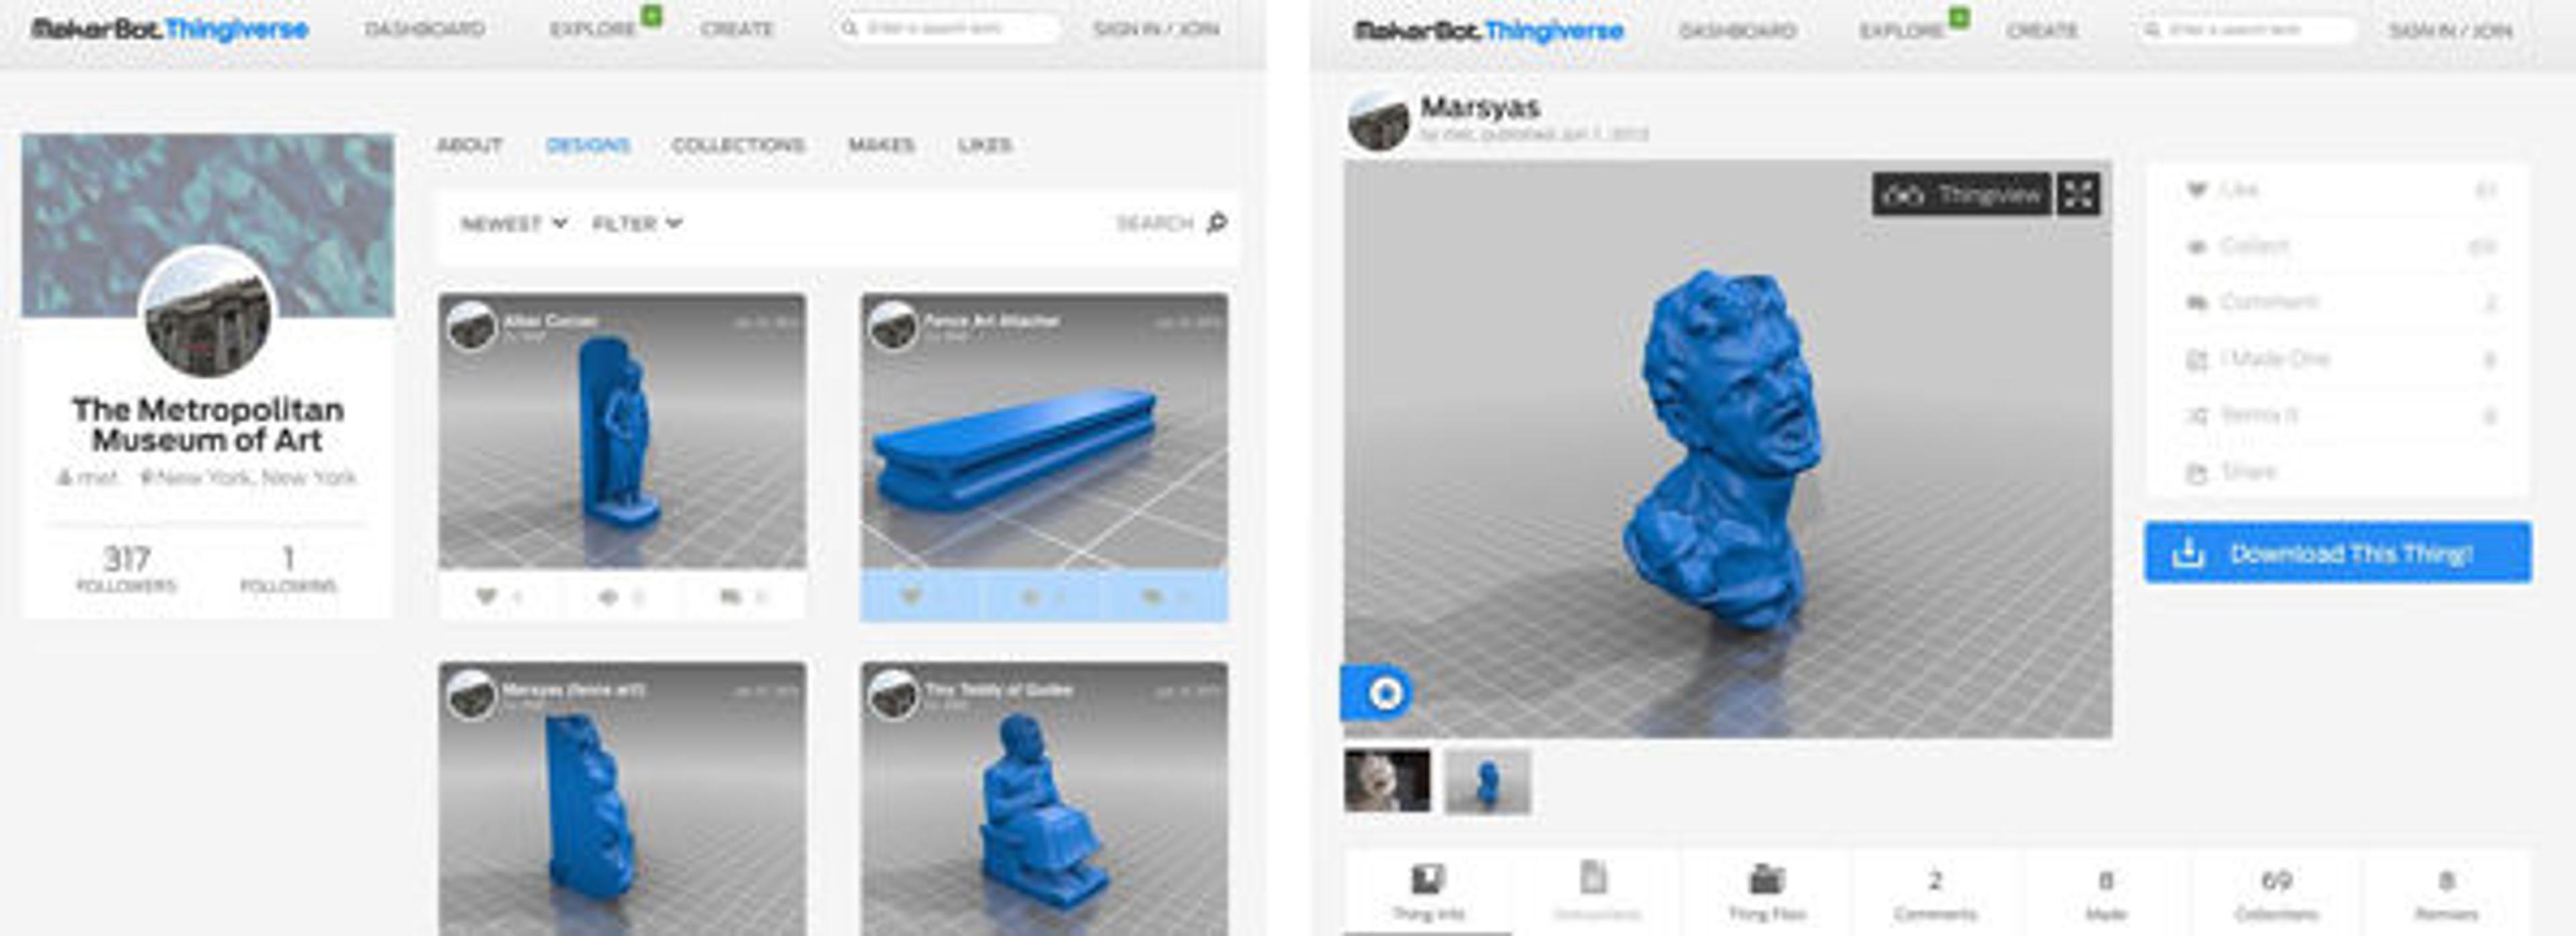 Screenshots of 3D objects uploaded to the Met's Thingverse page.